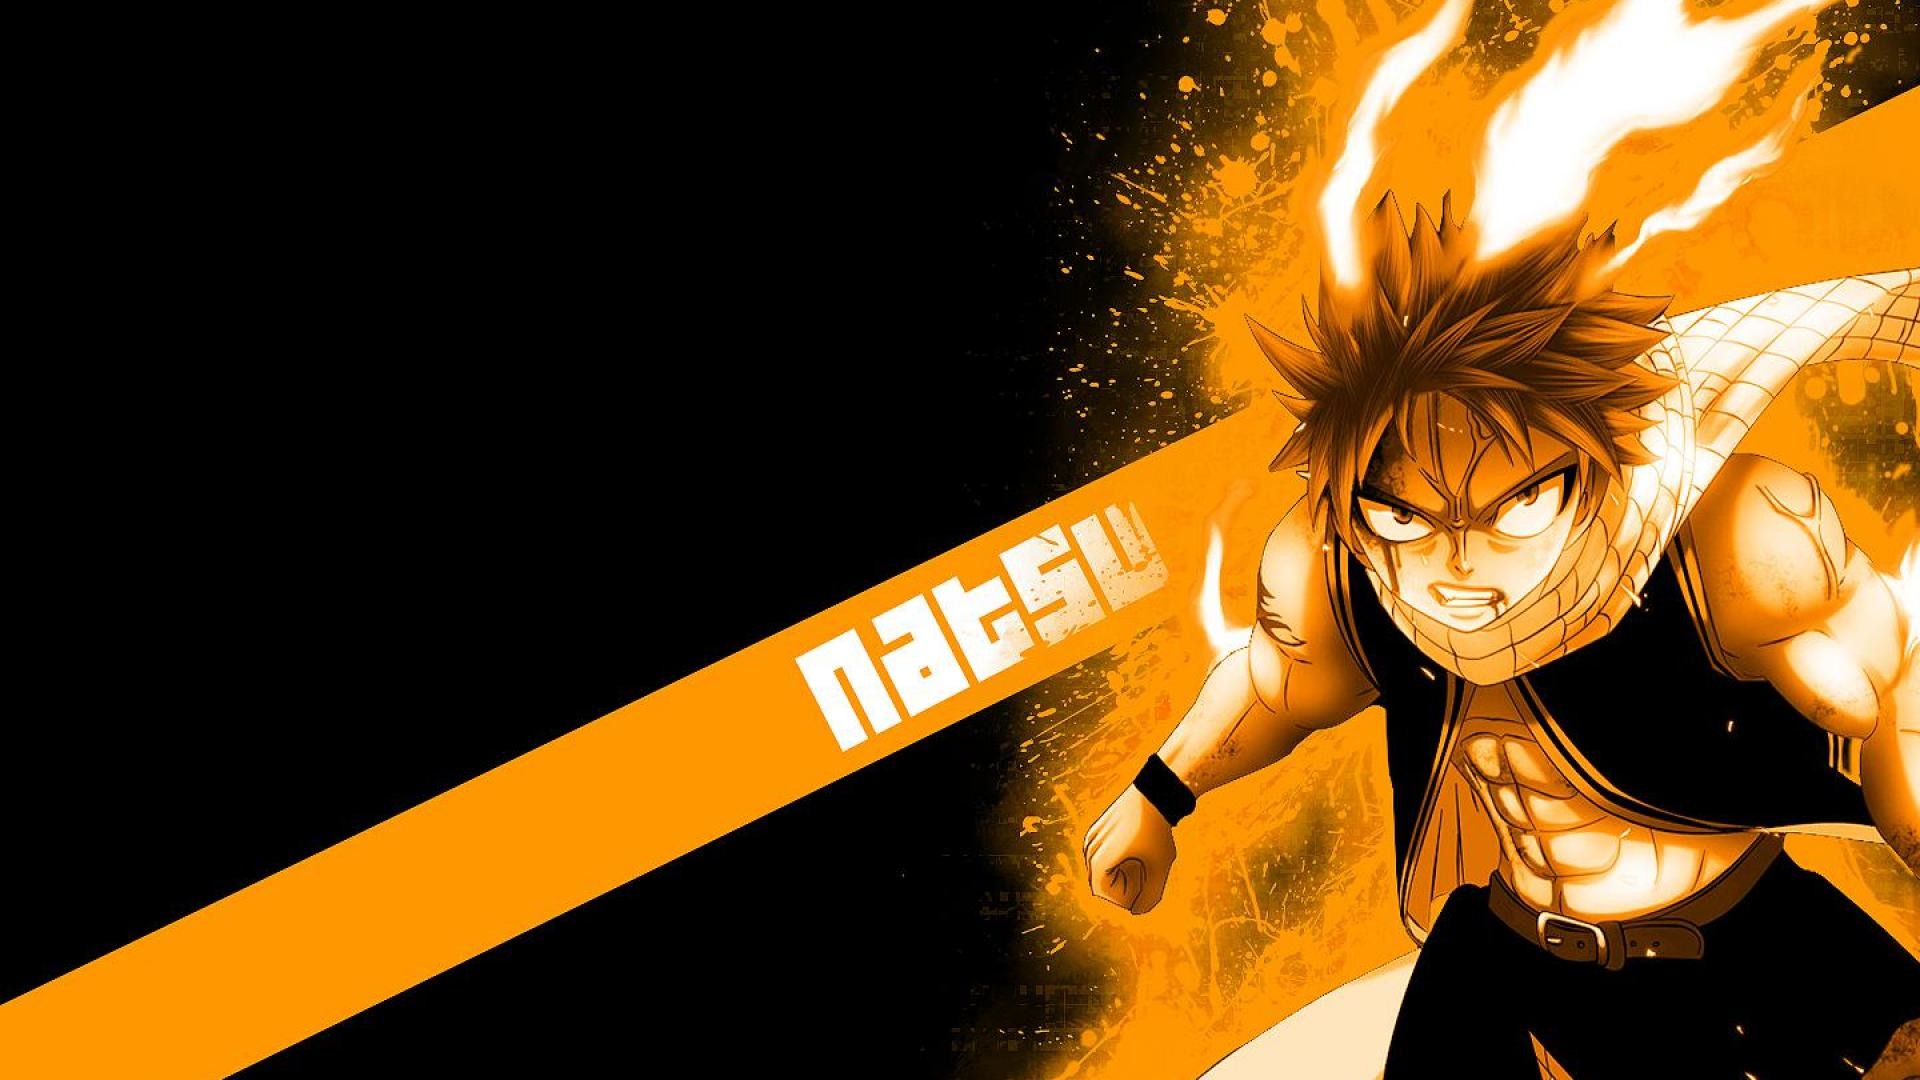 1920x1080 Fairy tail natsu - (#134519) - High Quality and Resolution .